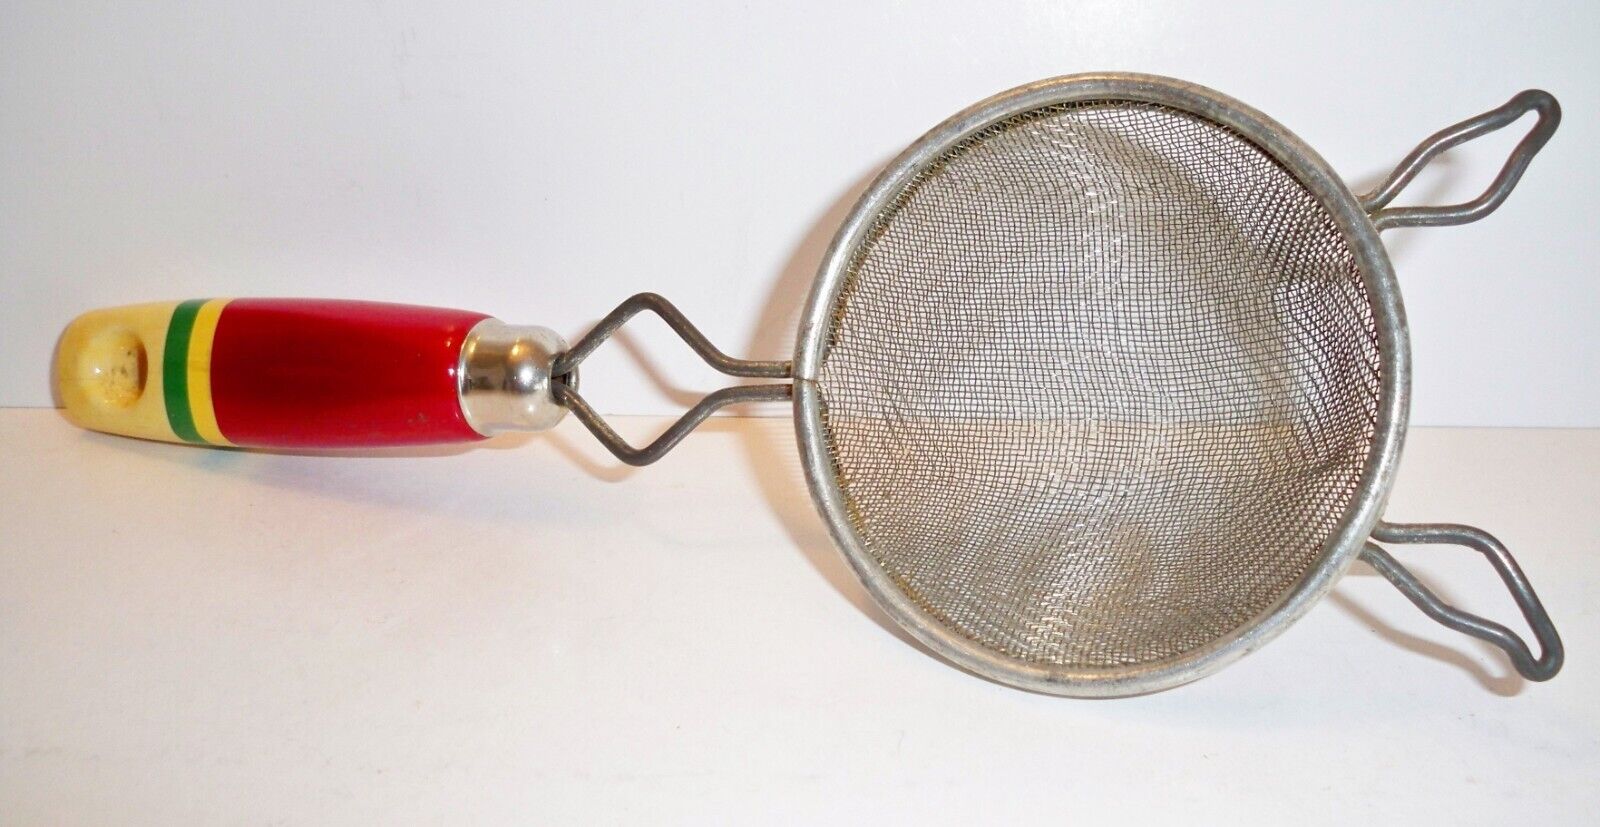 Vintage Small Ecko A&J Red/Cream Wood Handle Green Stripe Strainer/Sifter